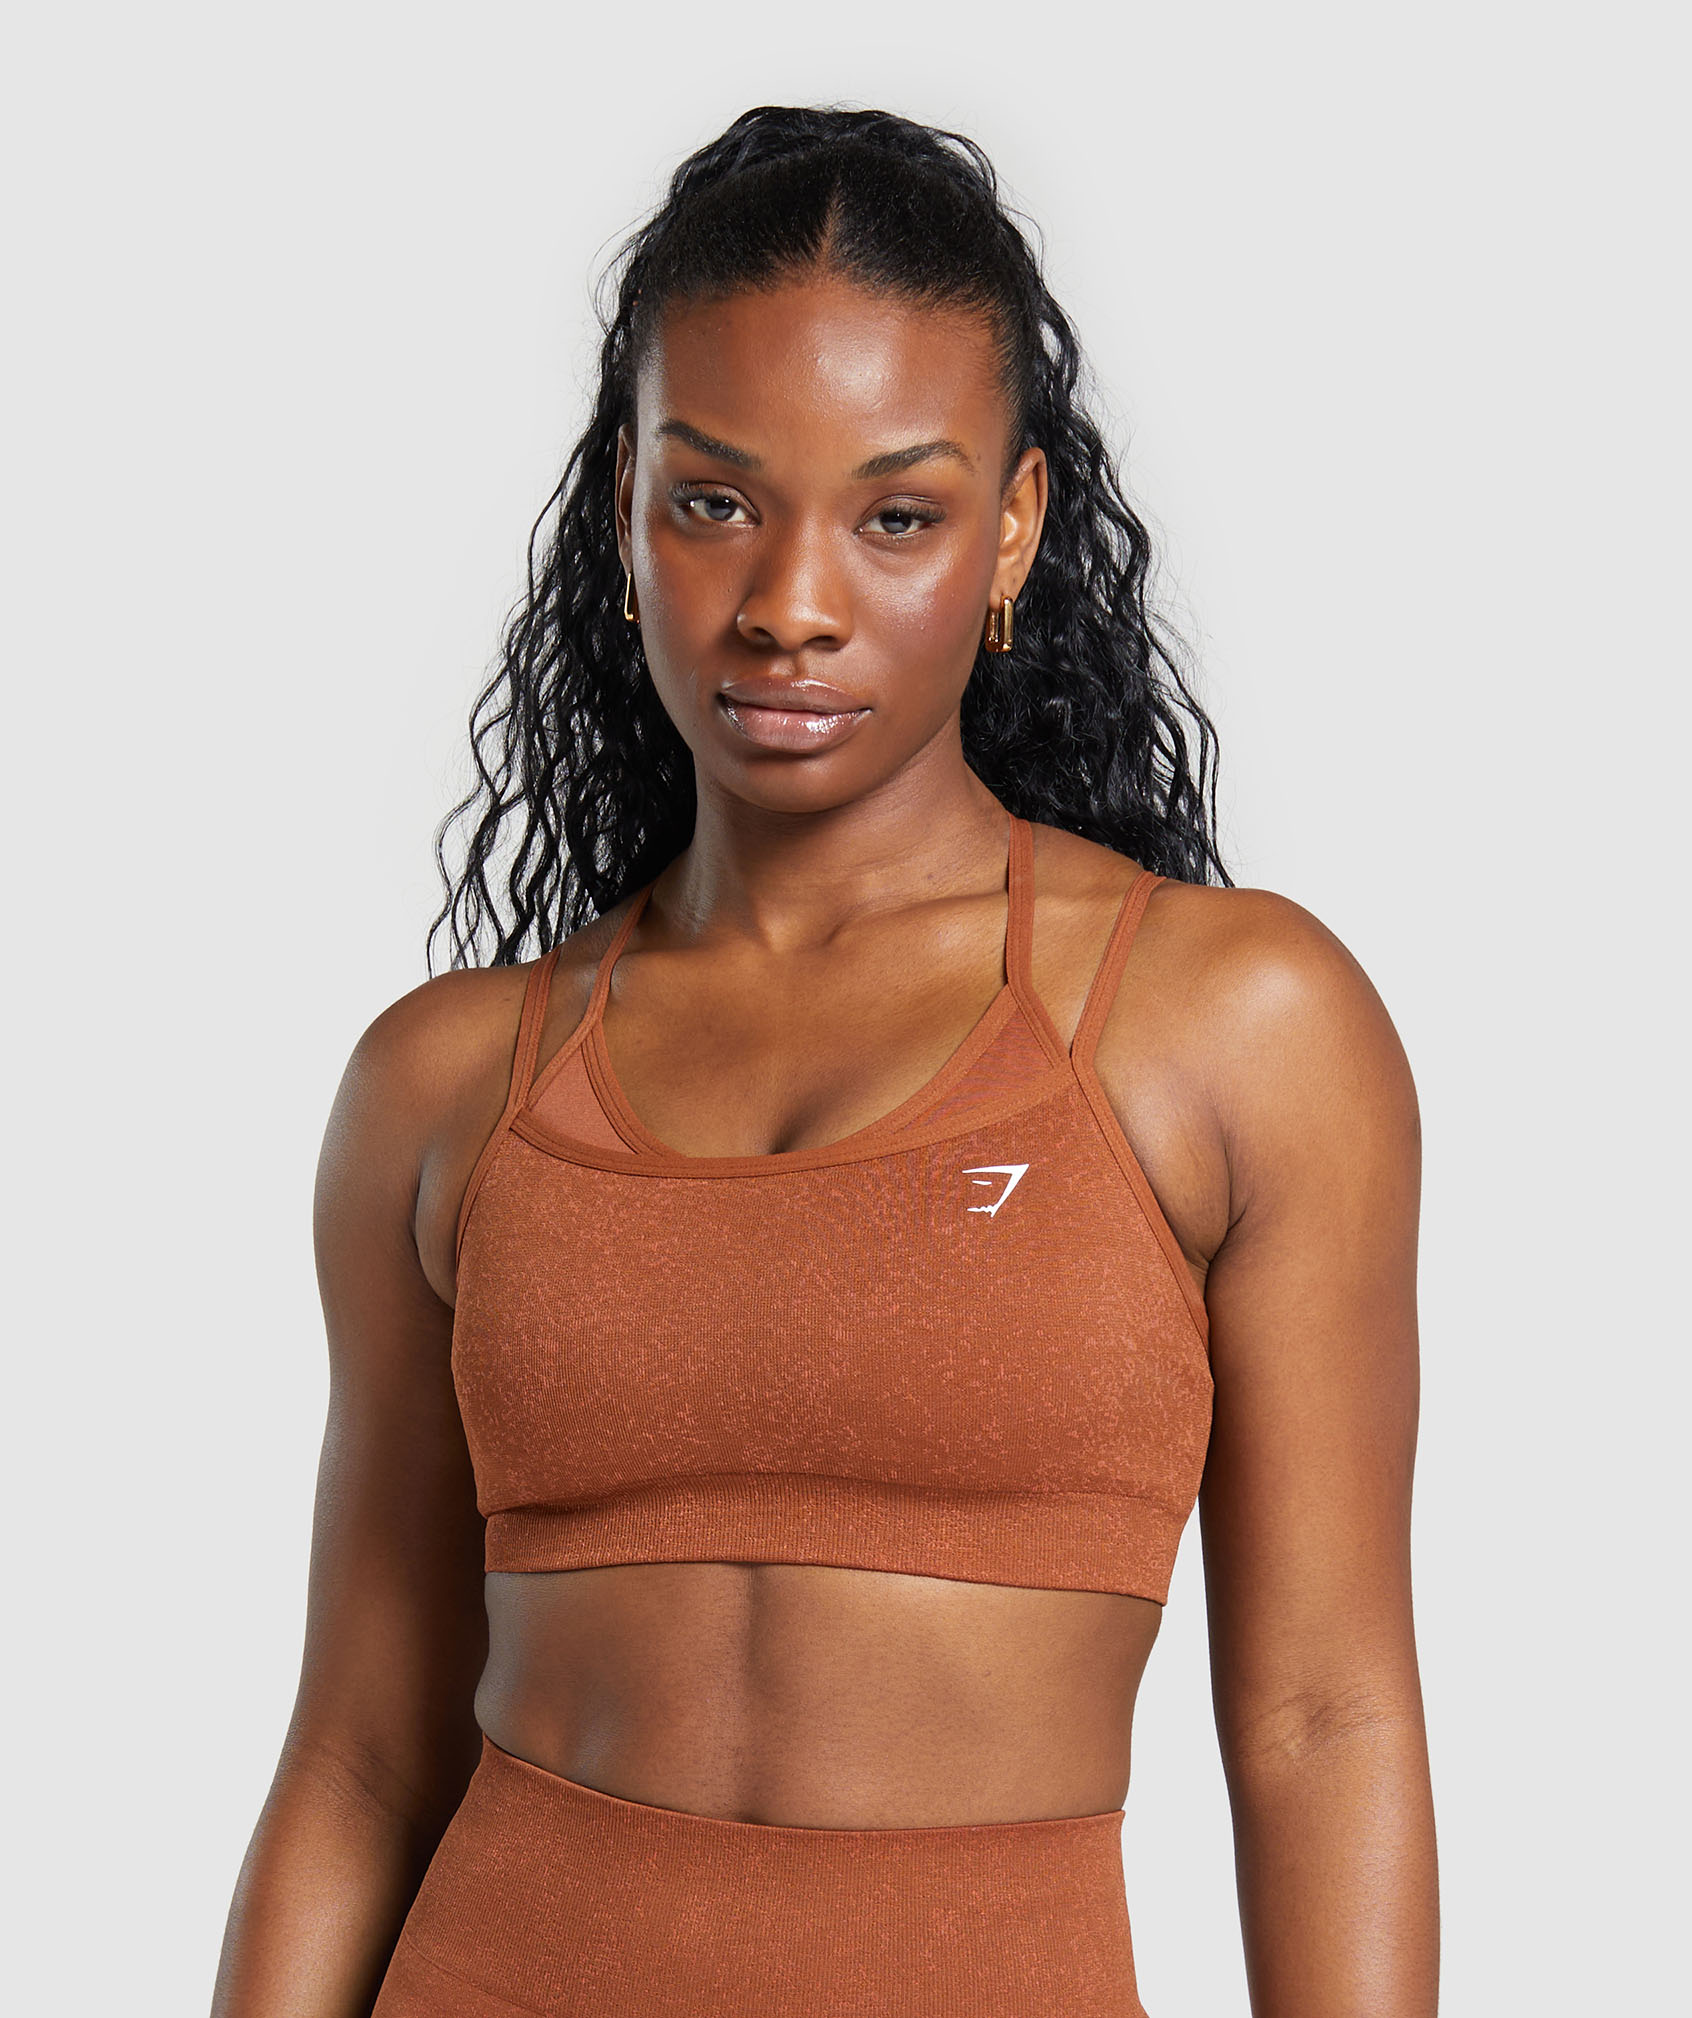 Finding the Right Sports Bra